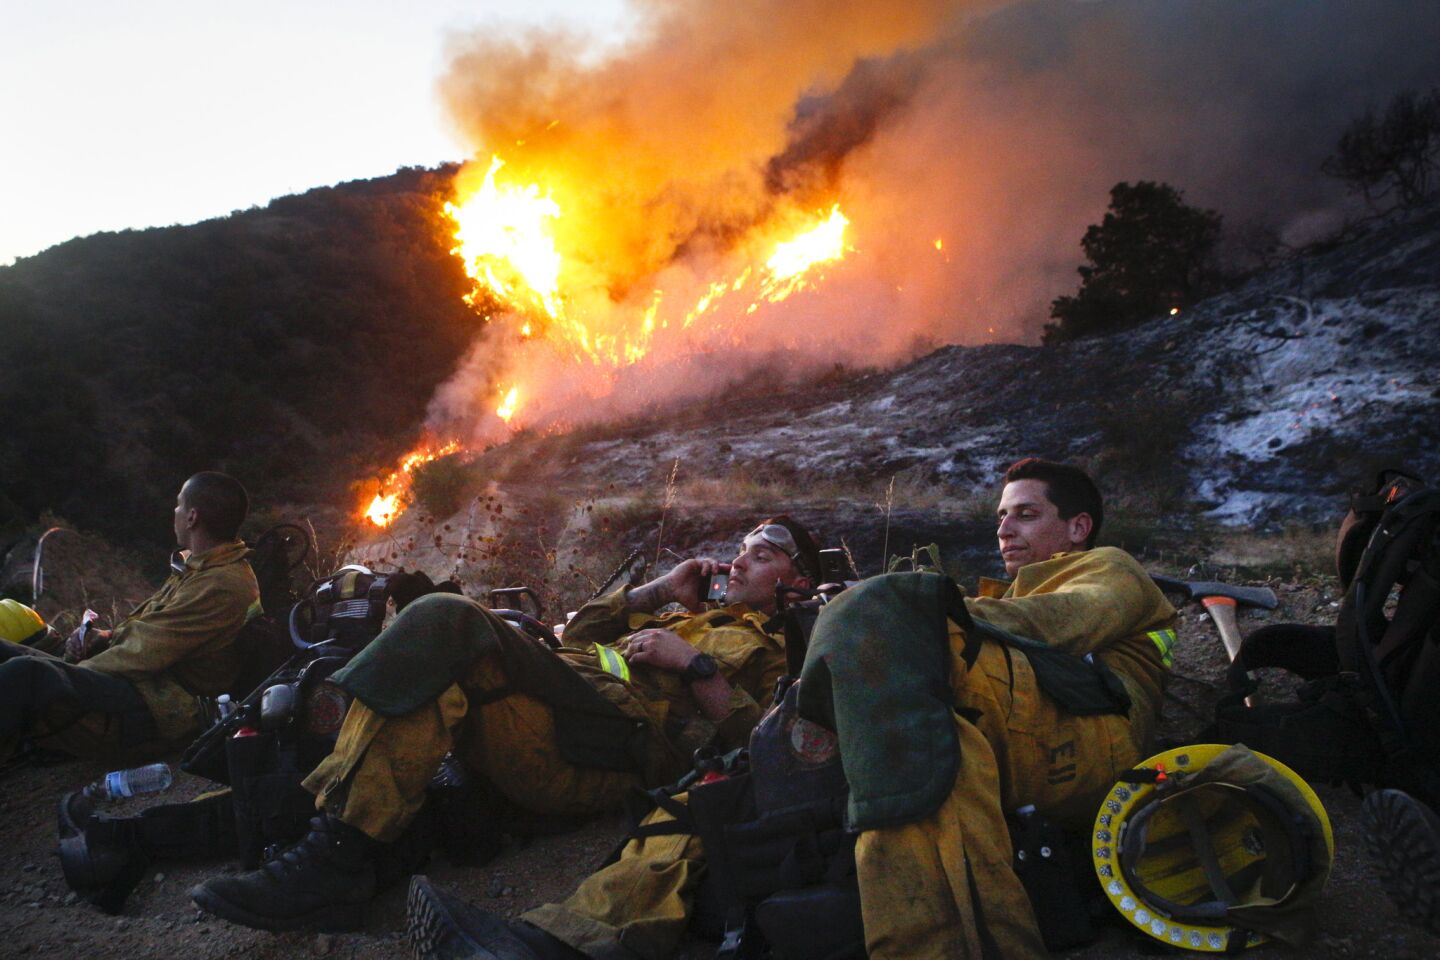 Los Angeles County firefighters rest as the Fish Fire burns behind them Monday afternoo in Duarte.